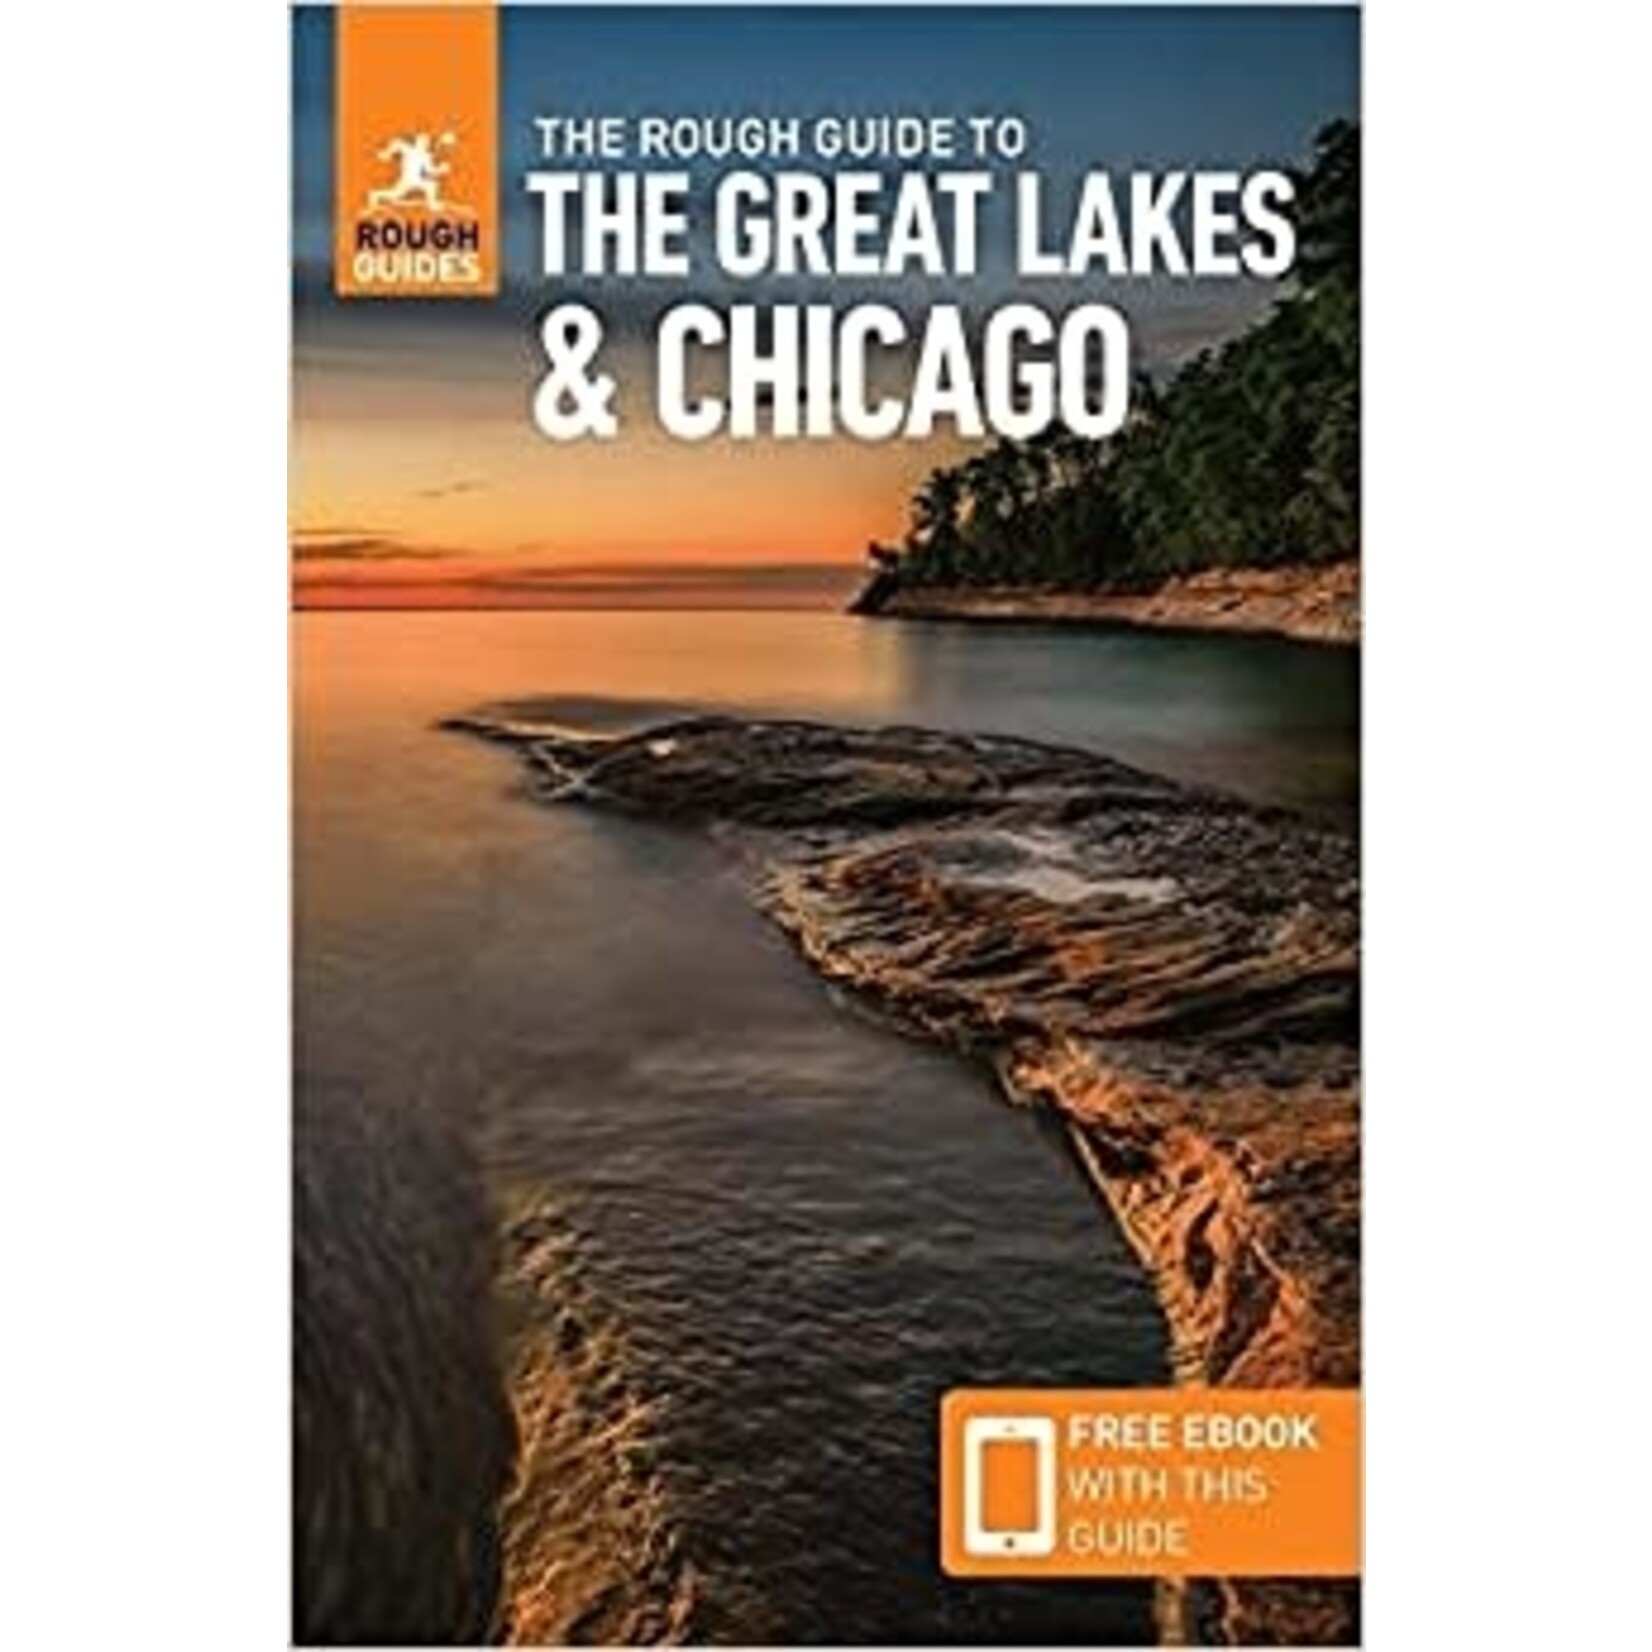 The Rough Guide to the Great Lakes & Chicago